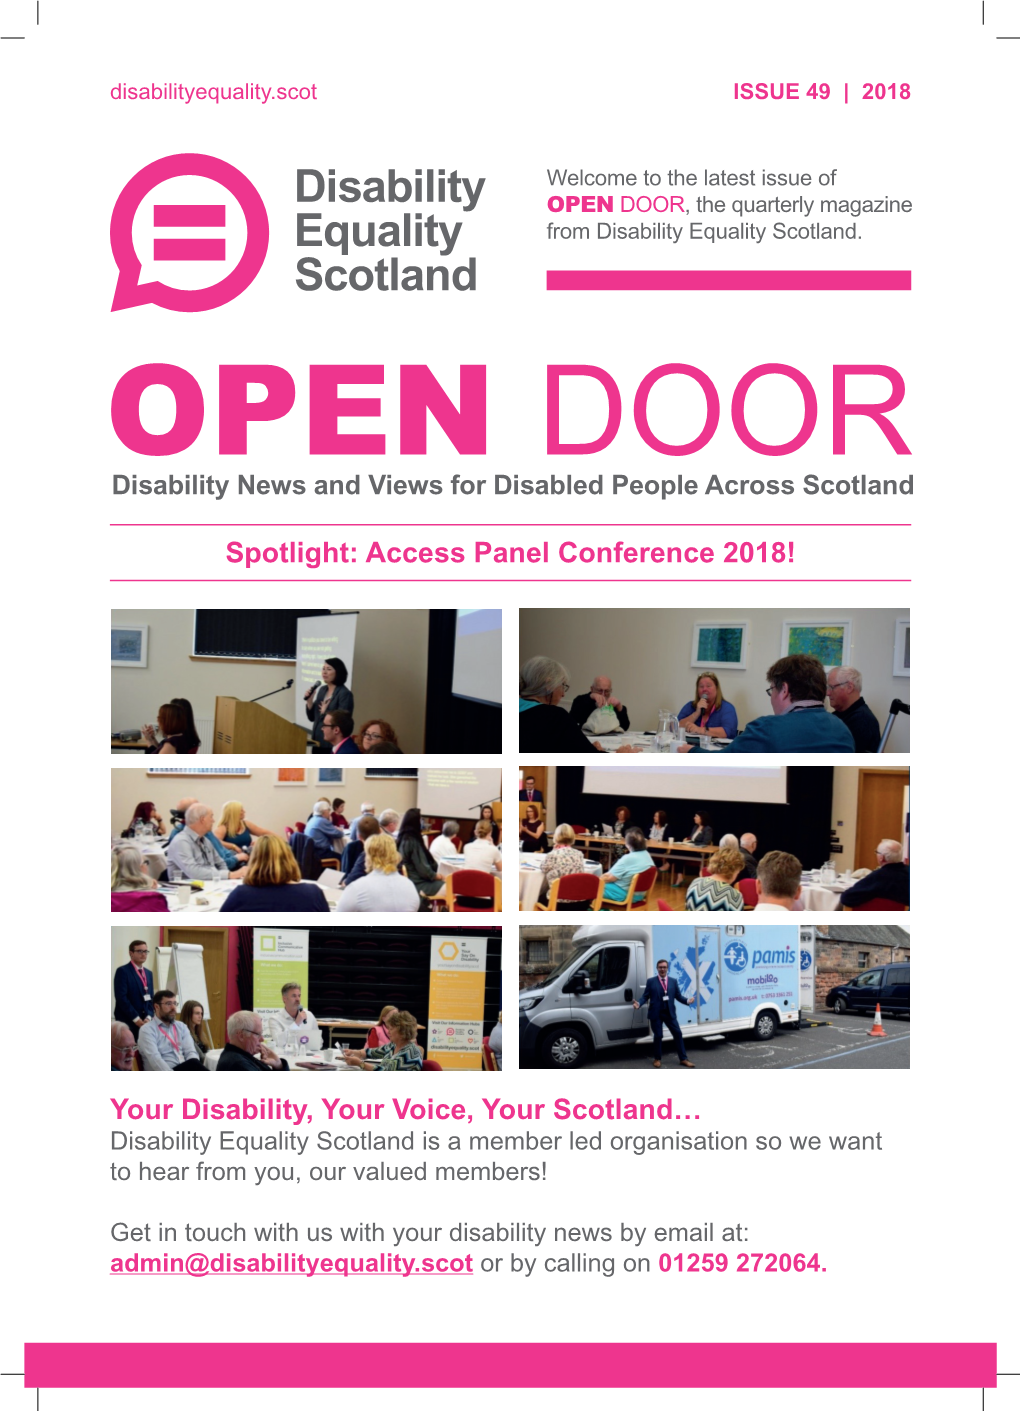 OPEN DOOR, the Quarterly Magazine from Disability Equality Scotland